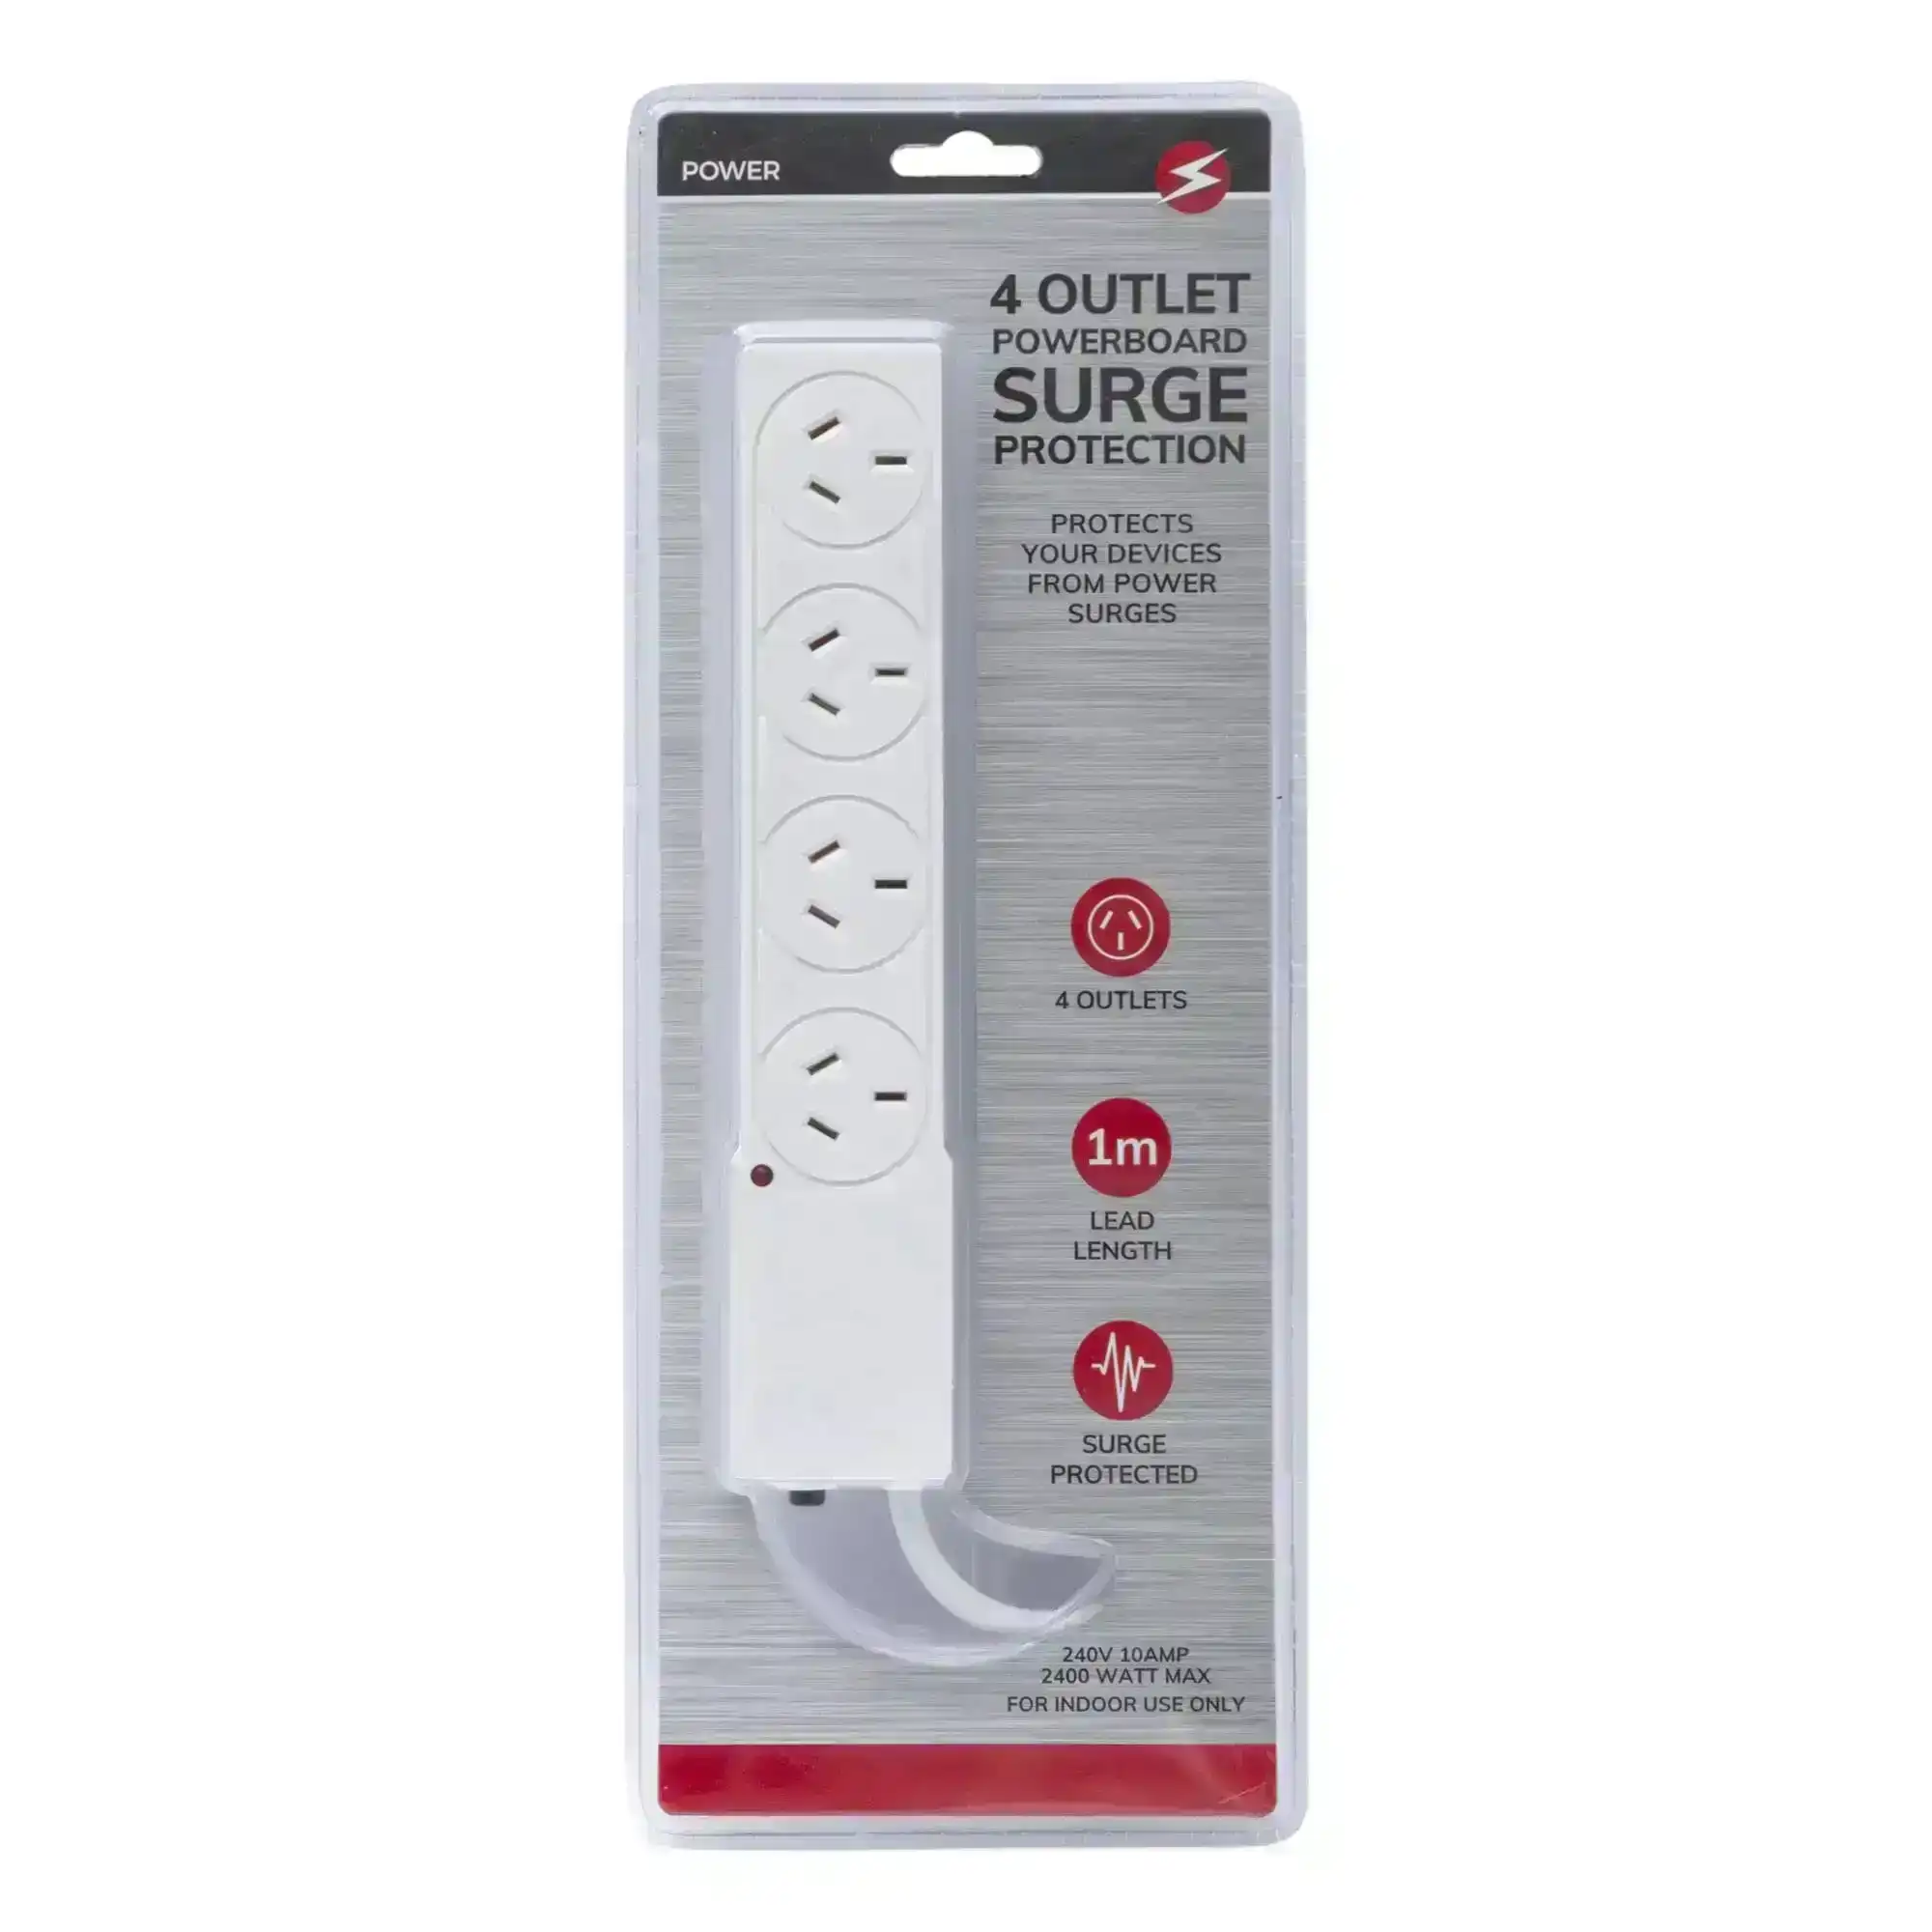 4 Outlet Powerboard With Surge Protection